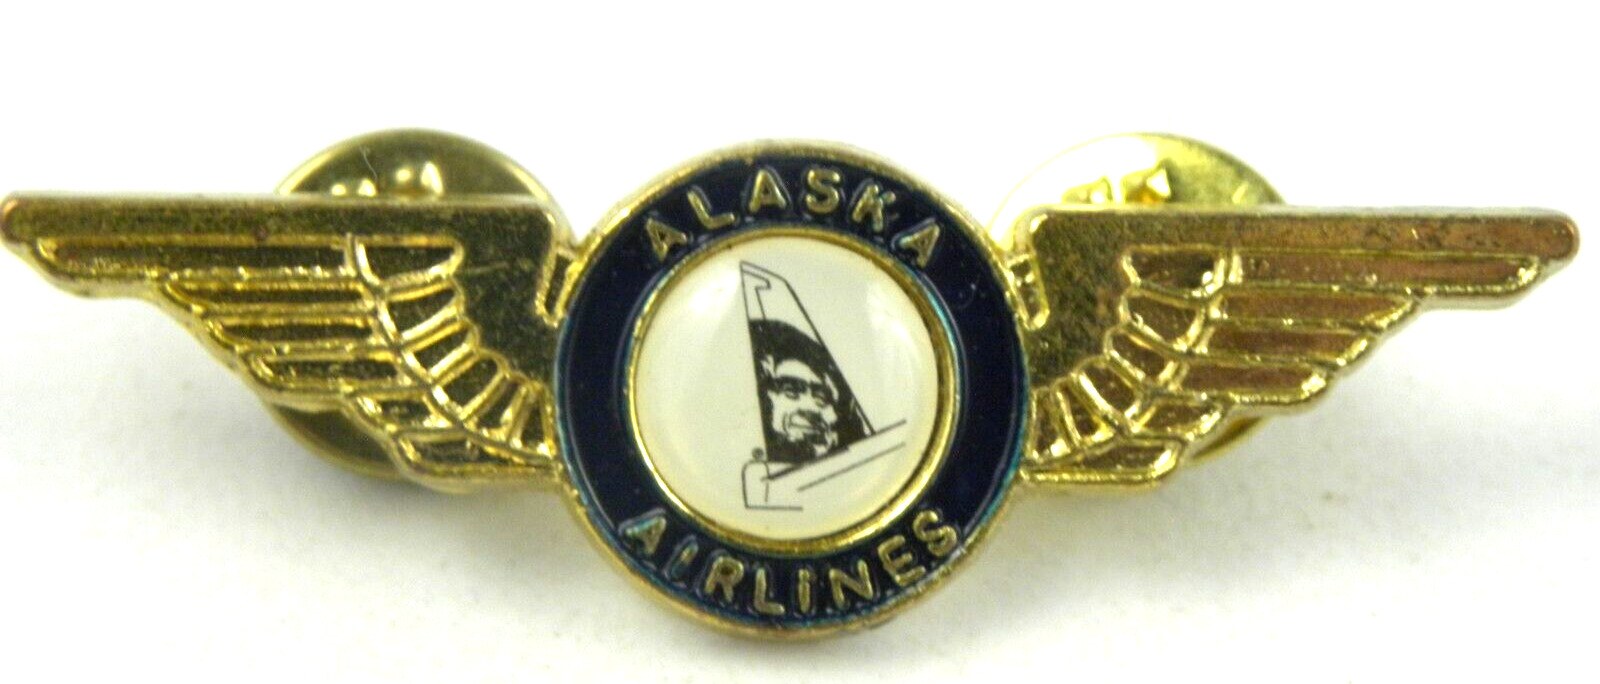 Vintage Alaska Airlines Wings Pin Plane Airplane Business Aviation